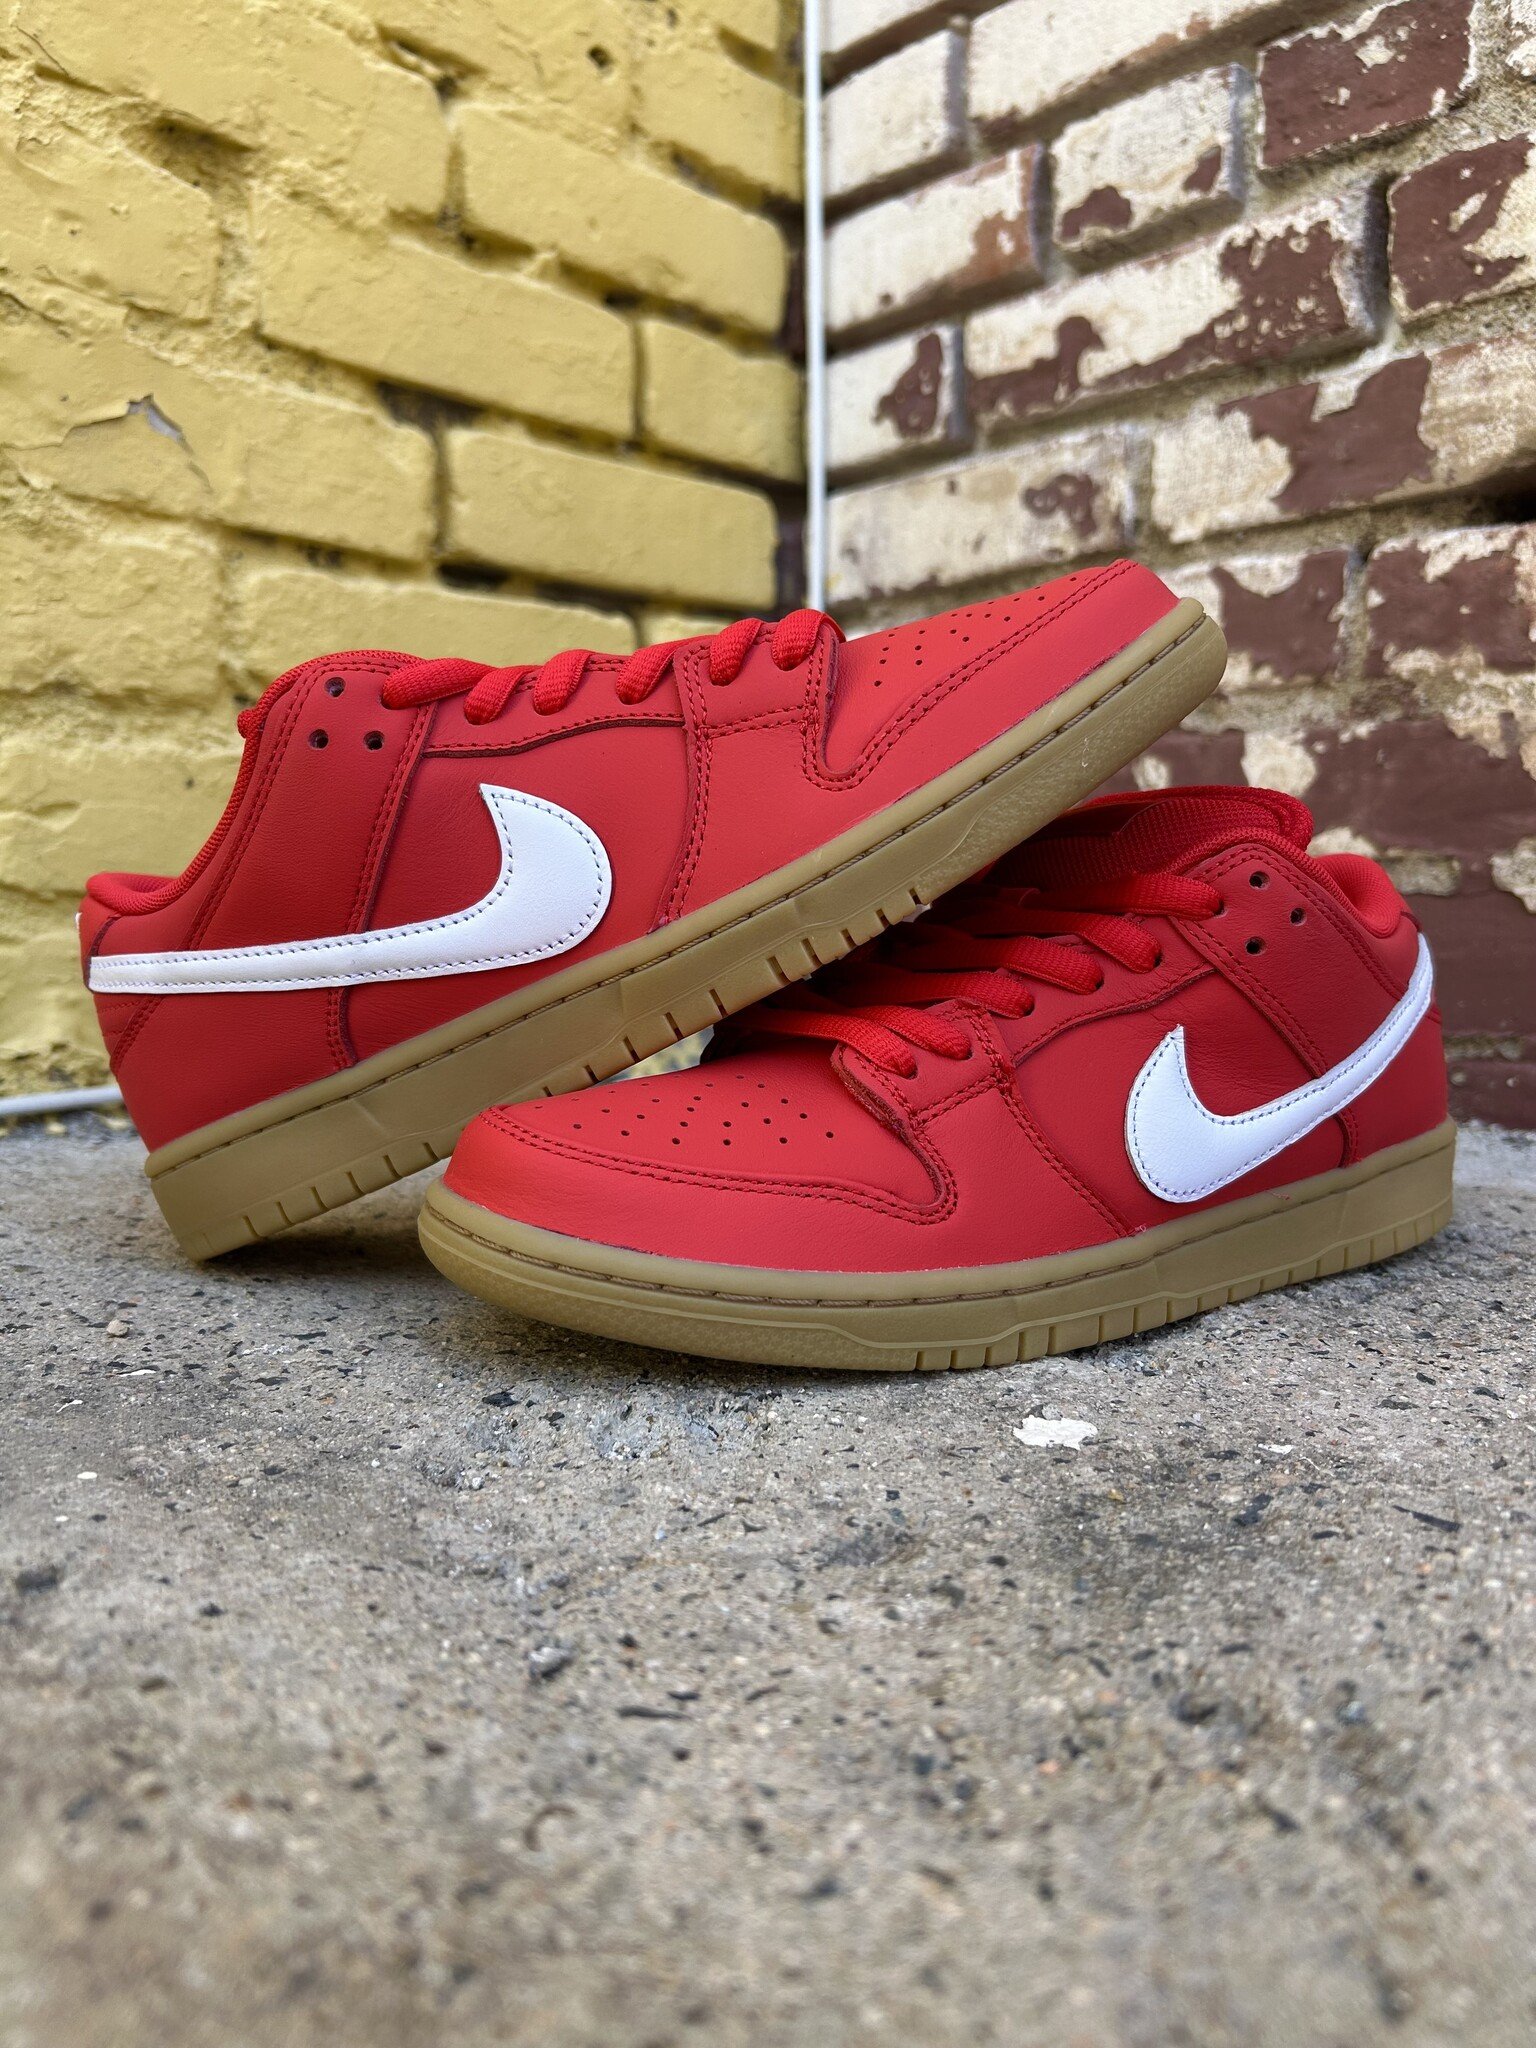 THE NIKE SB "RED GUM" DUNK LOW RAFFLE